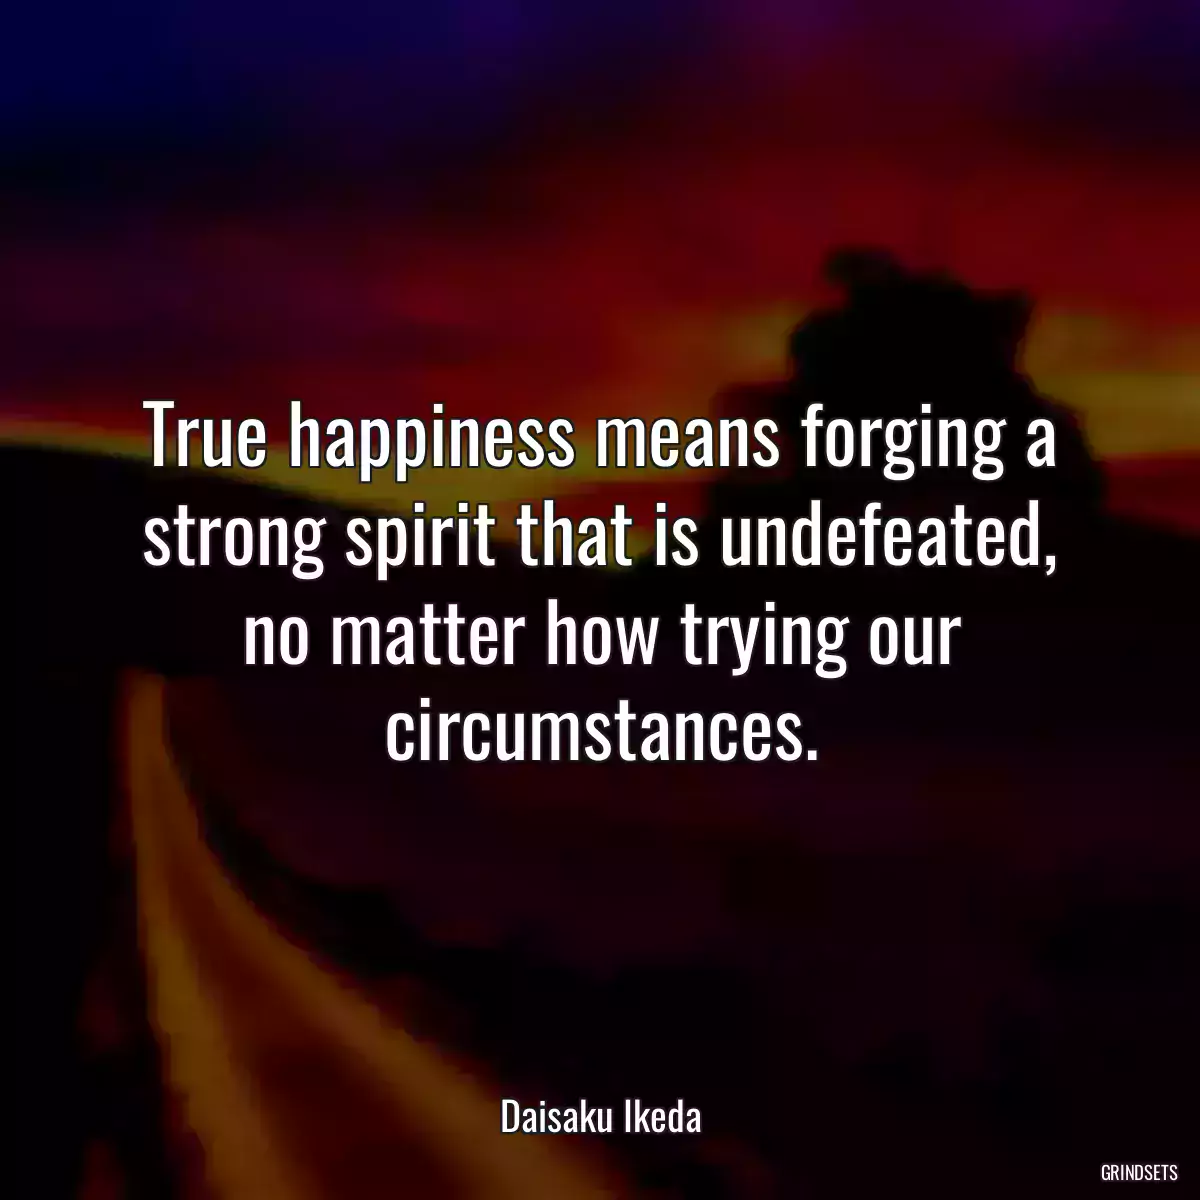 True happiness means forging a strong spirit that is undefeated, no matter how trying our circumstances.